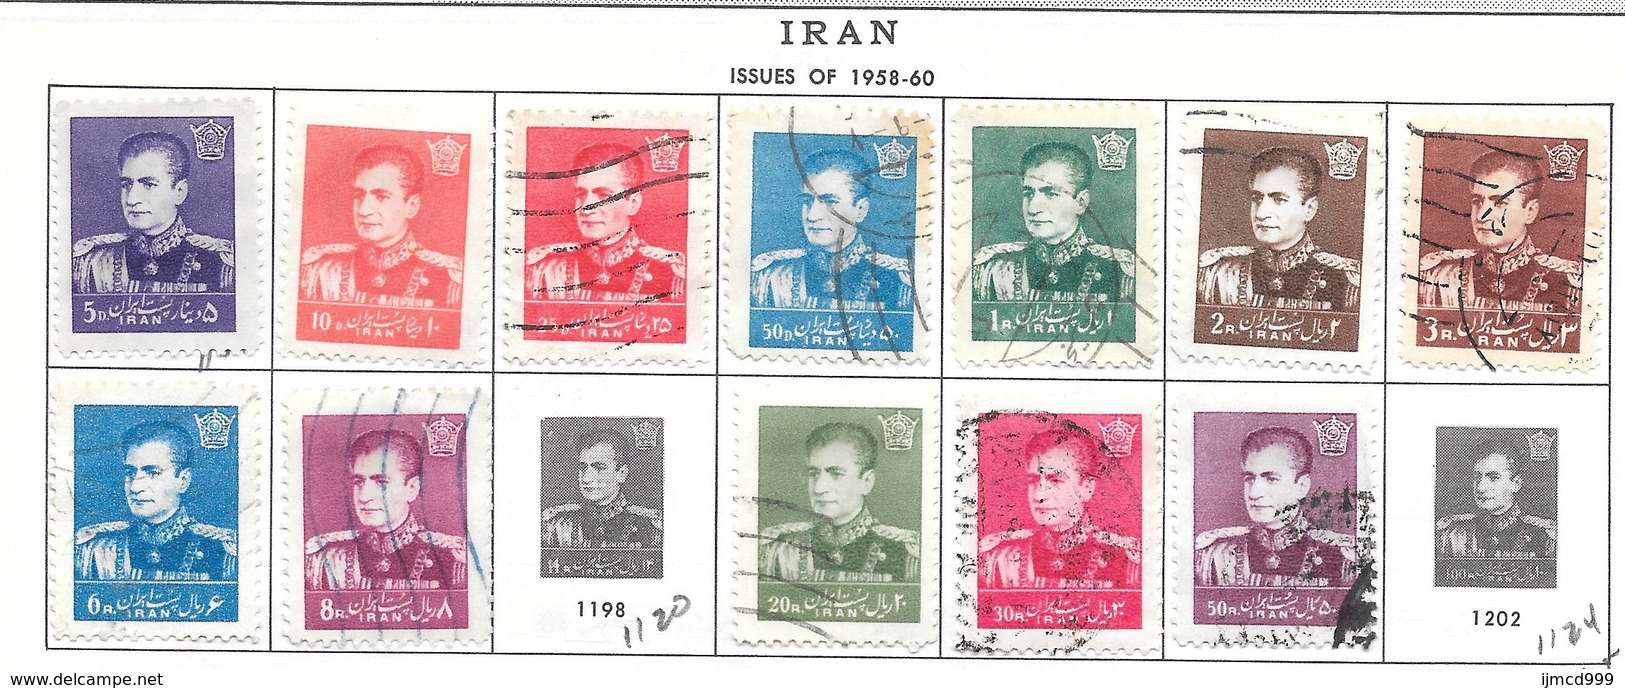 PERSIA/IRAN. 1940s/1970s ON 8 PAGES - Iran